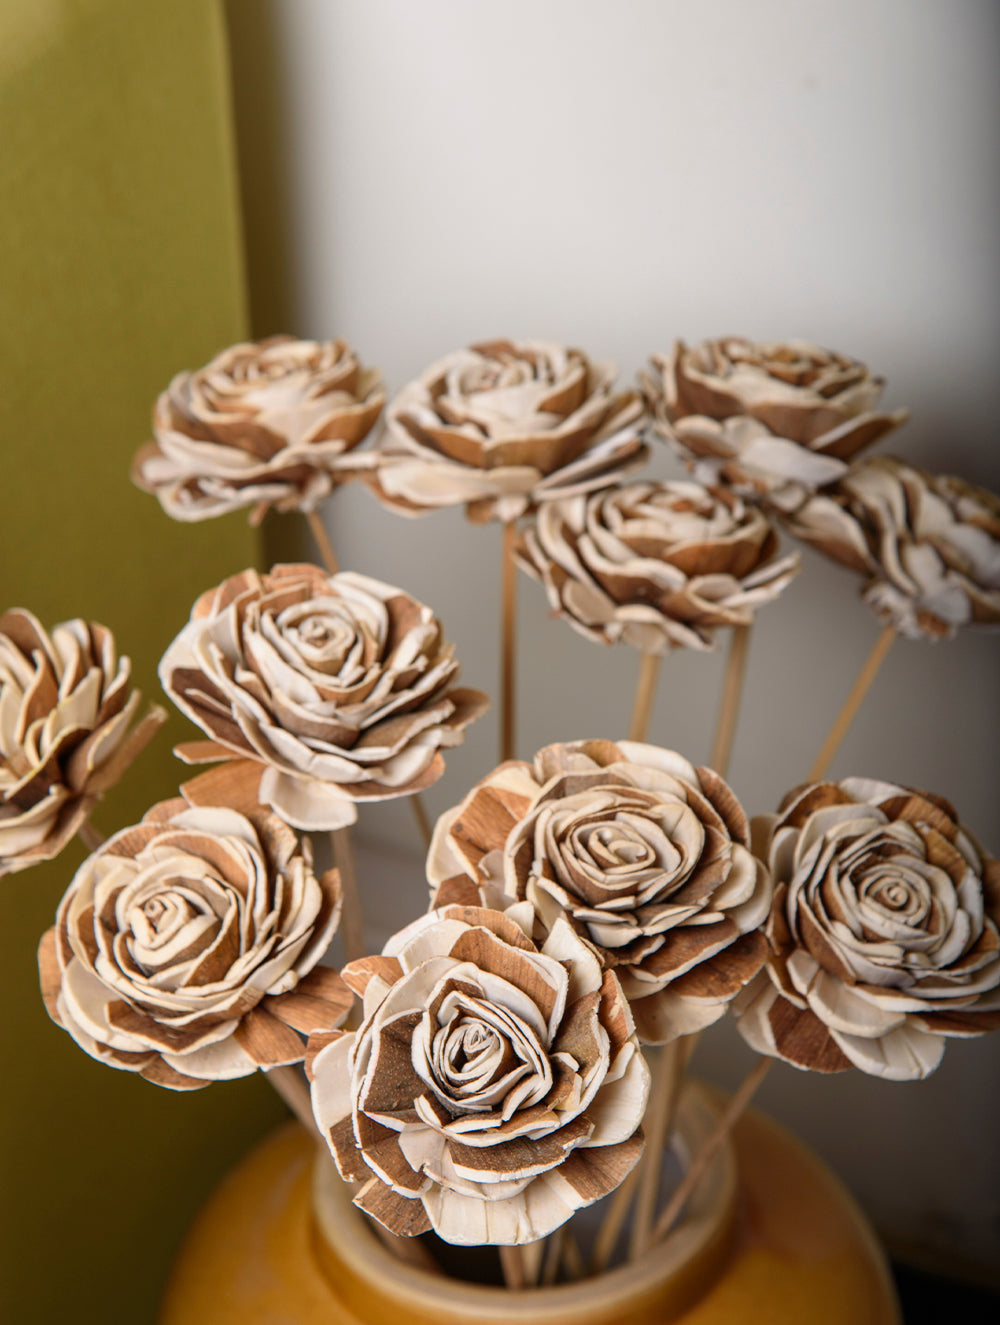 Load image into Gallery viewer, Handcrafted Shola Flowers - Wild Wood Roses (Bunch of 11)